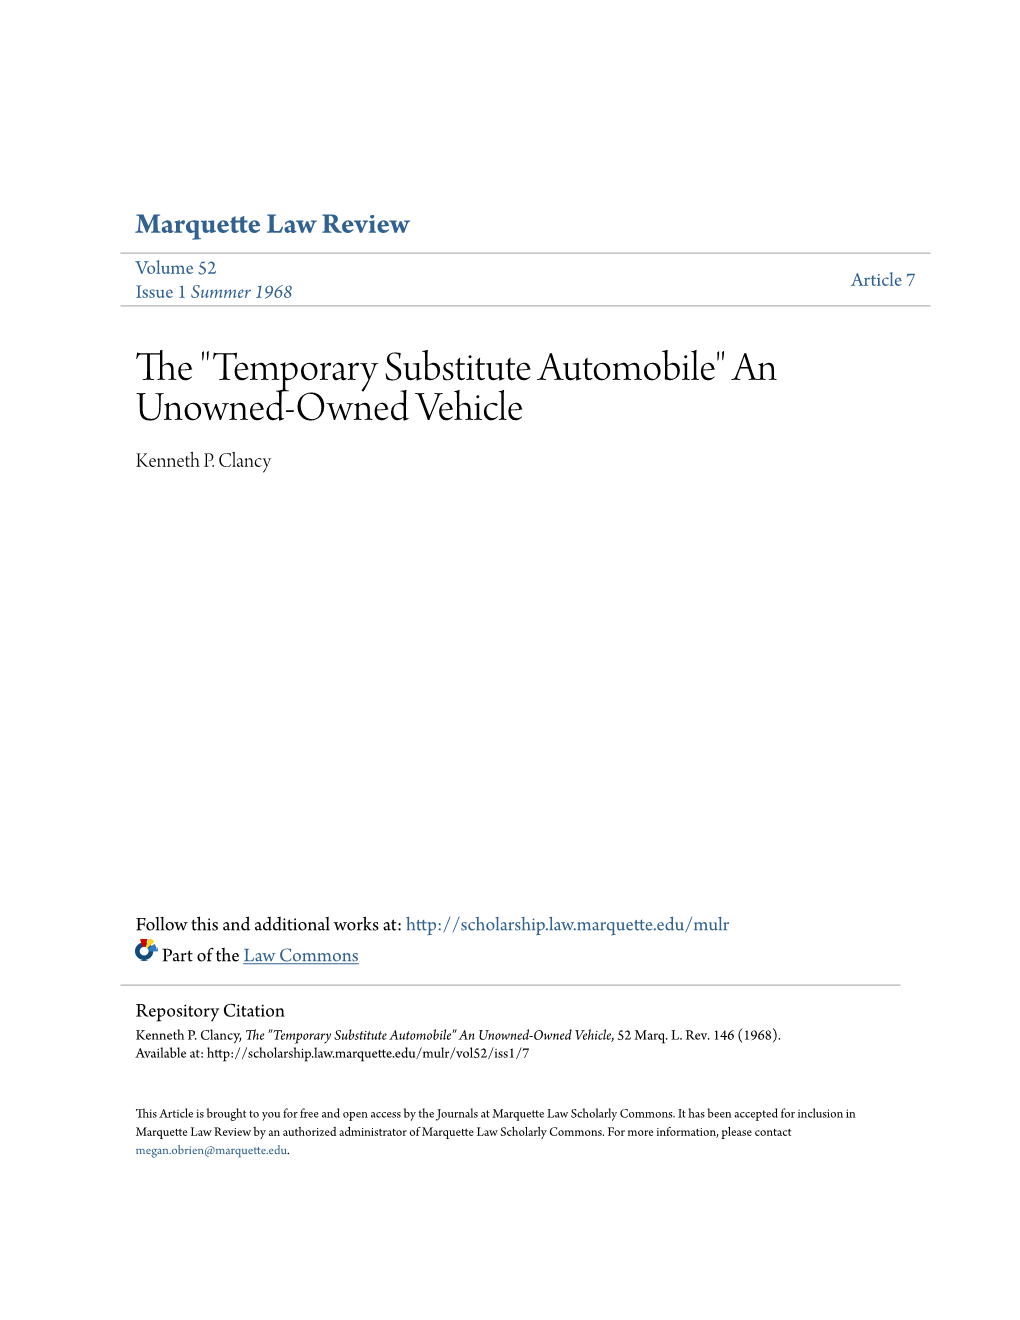 Temporary Substitute Automobile" an Unowned-Owned Vehicle Kenneth P